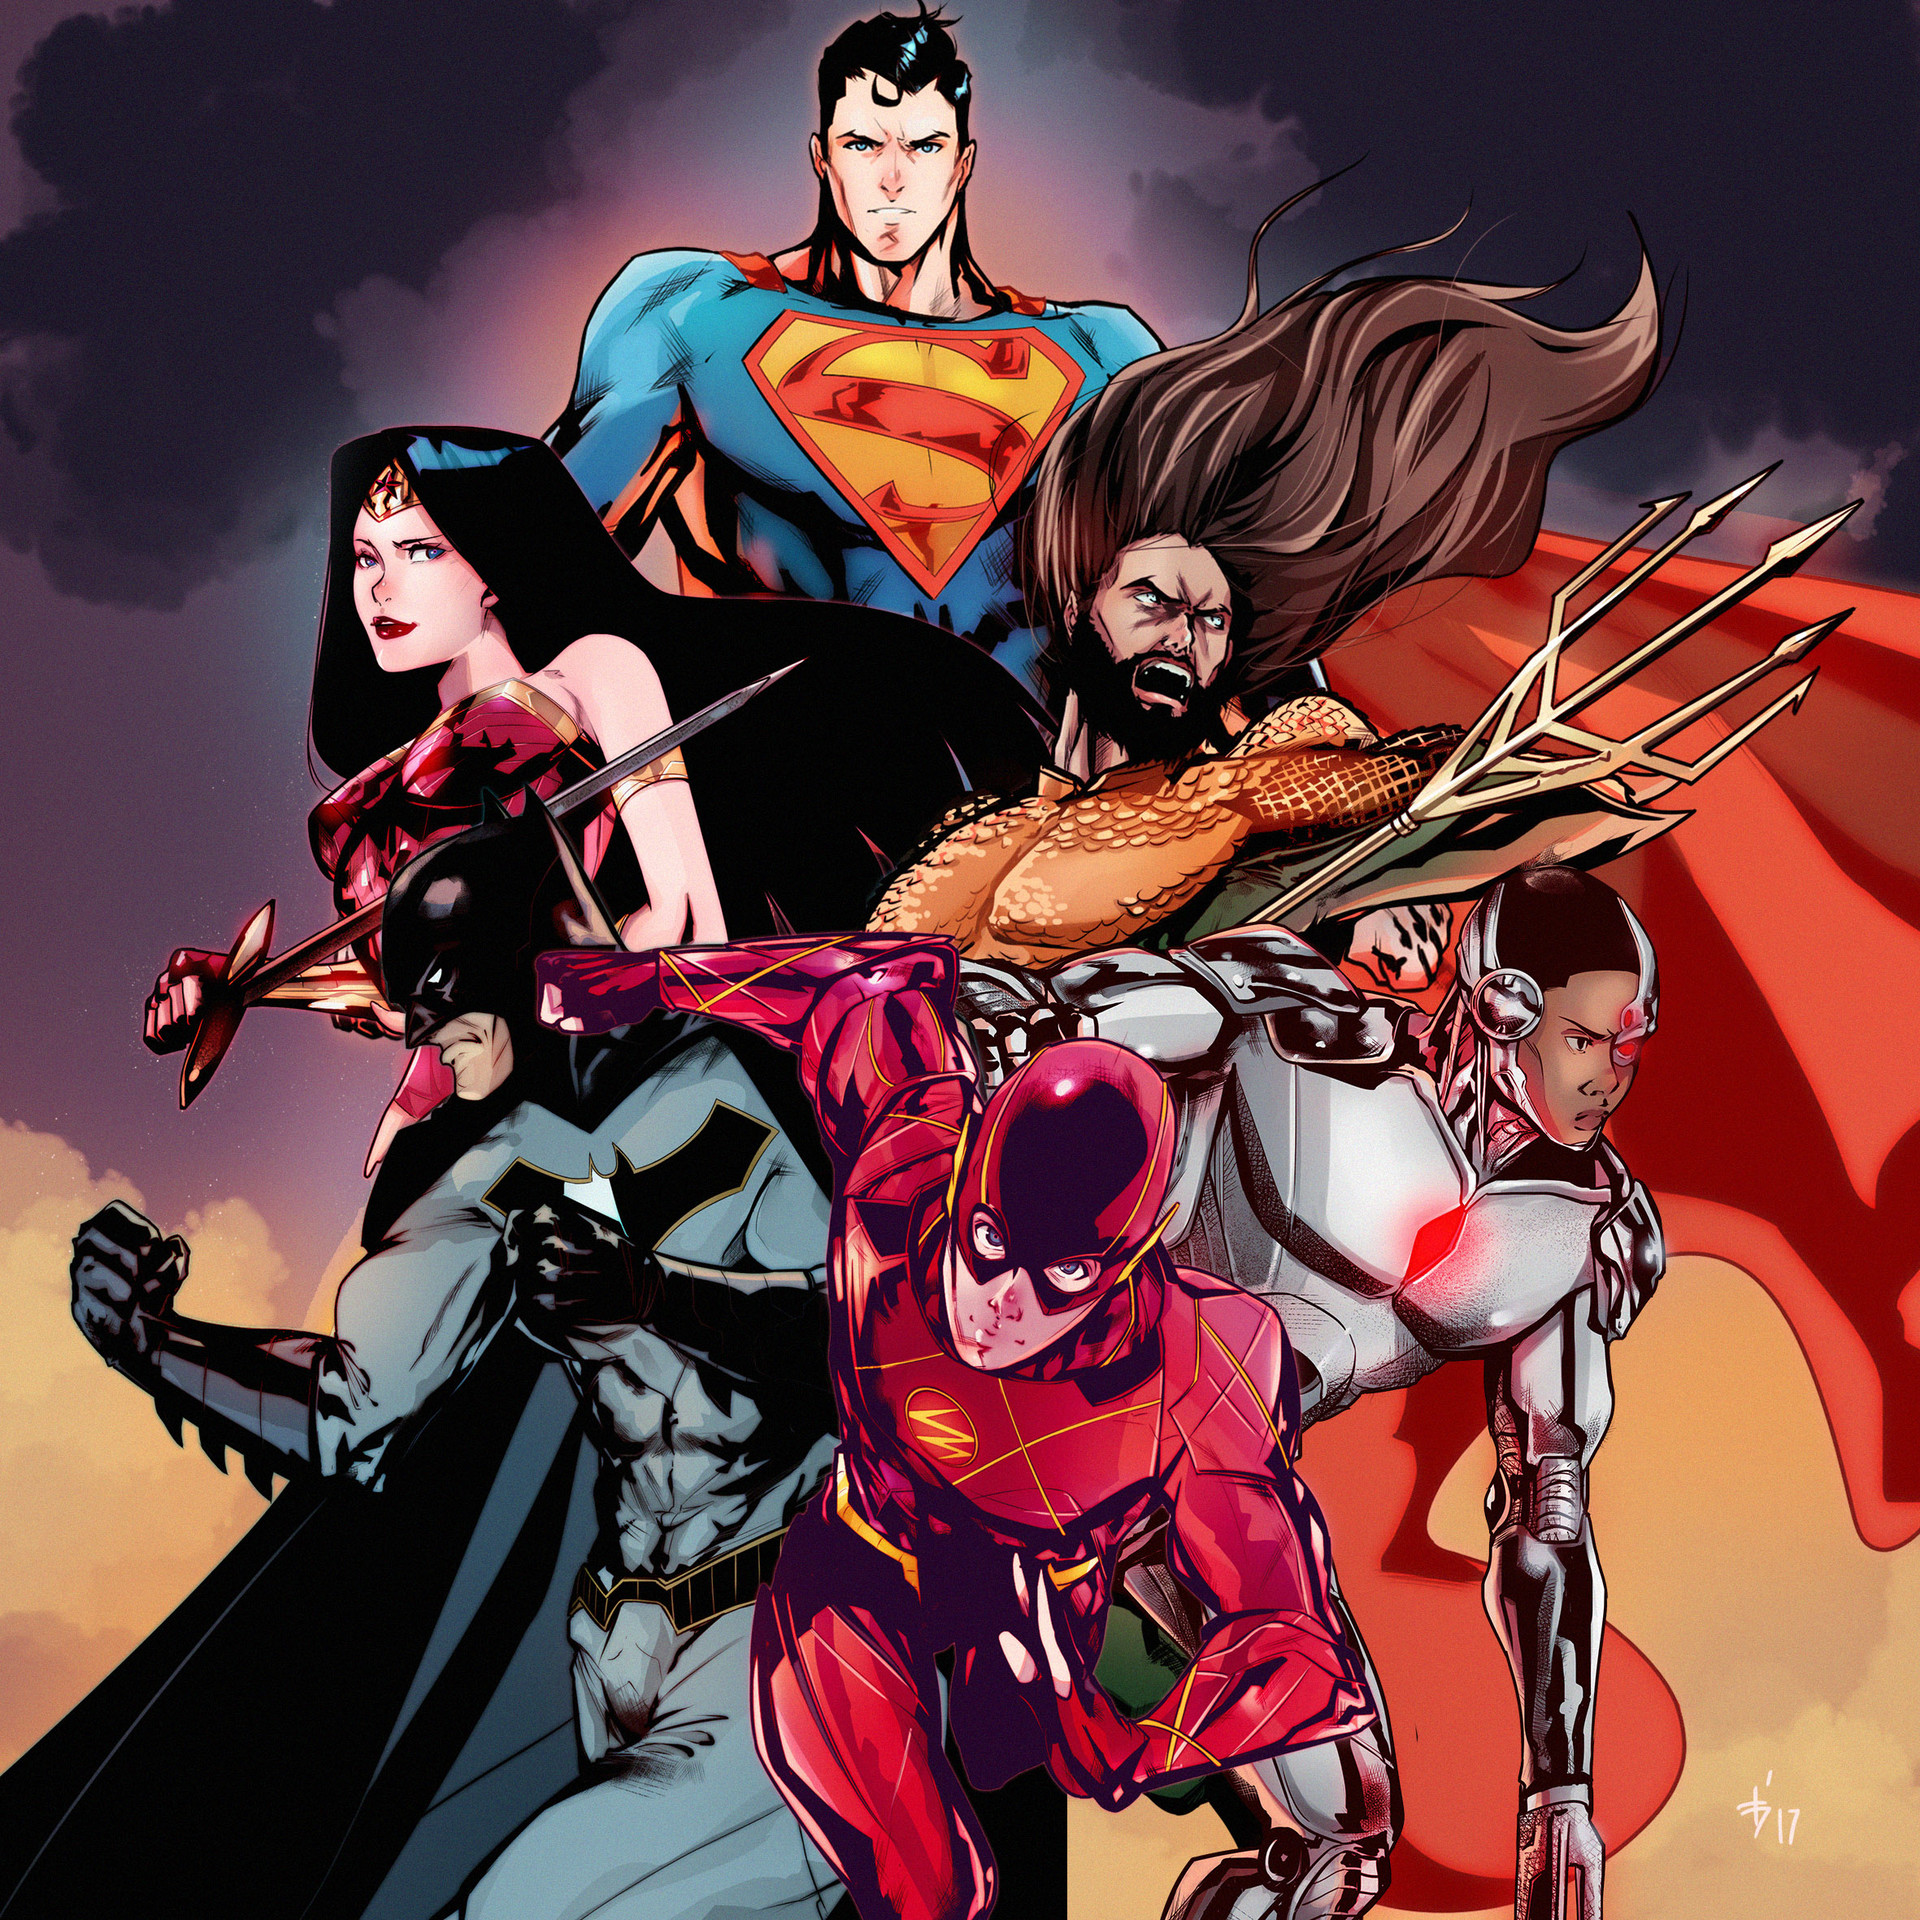 JUSTICE LEAGUE. Unite the league. And you can't save the world alone